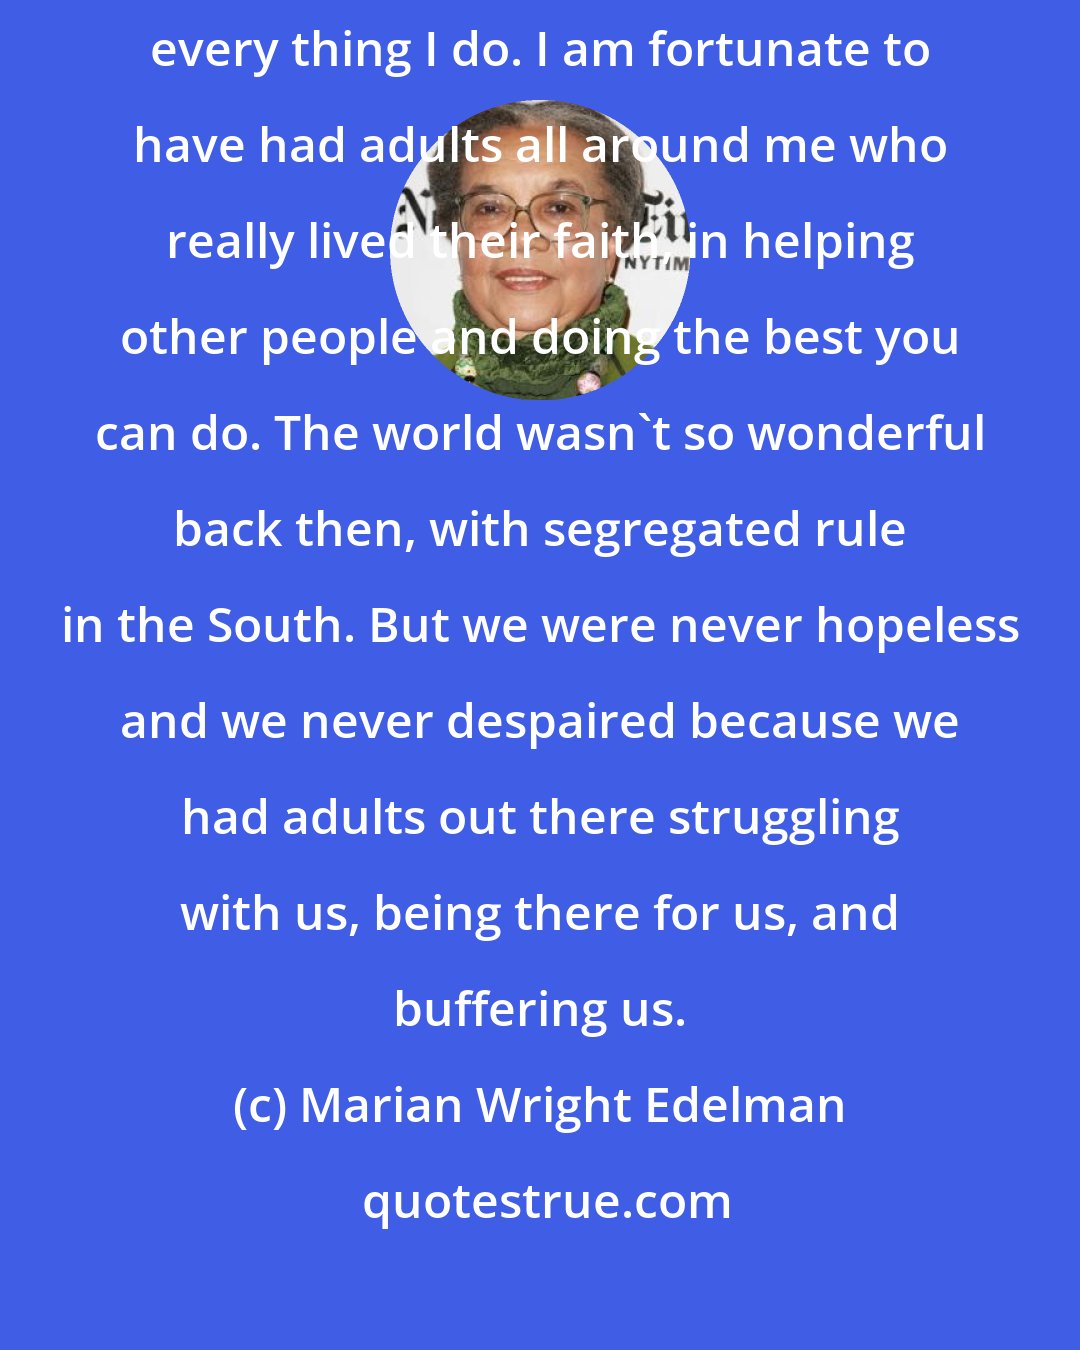 Marian Wright Edelman: I grew up in a very religious family and it is the motivating force to every thing I do. I am fortunate to have had adults all around me who really lived their faith, in helping other people and doing the best you can do. The world wasn't so wonderful back then, with segregated rule in the South. But we were never hopeless and we never despaired because we had adults out there struggling with us, being there for us, and buffering us.